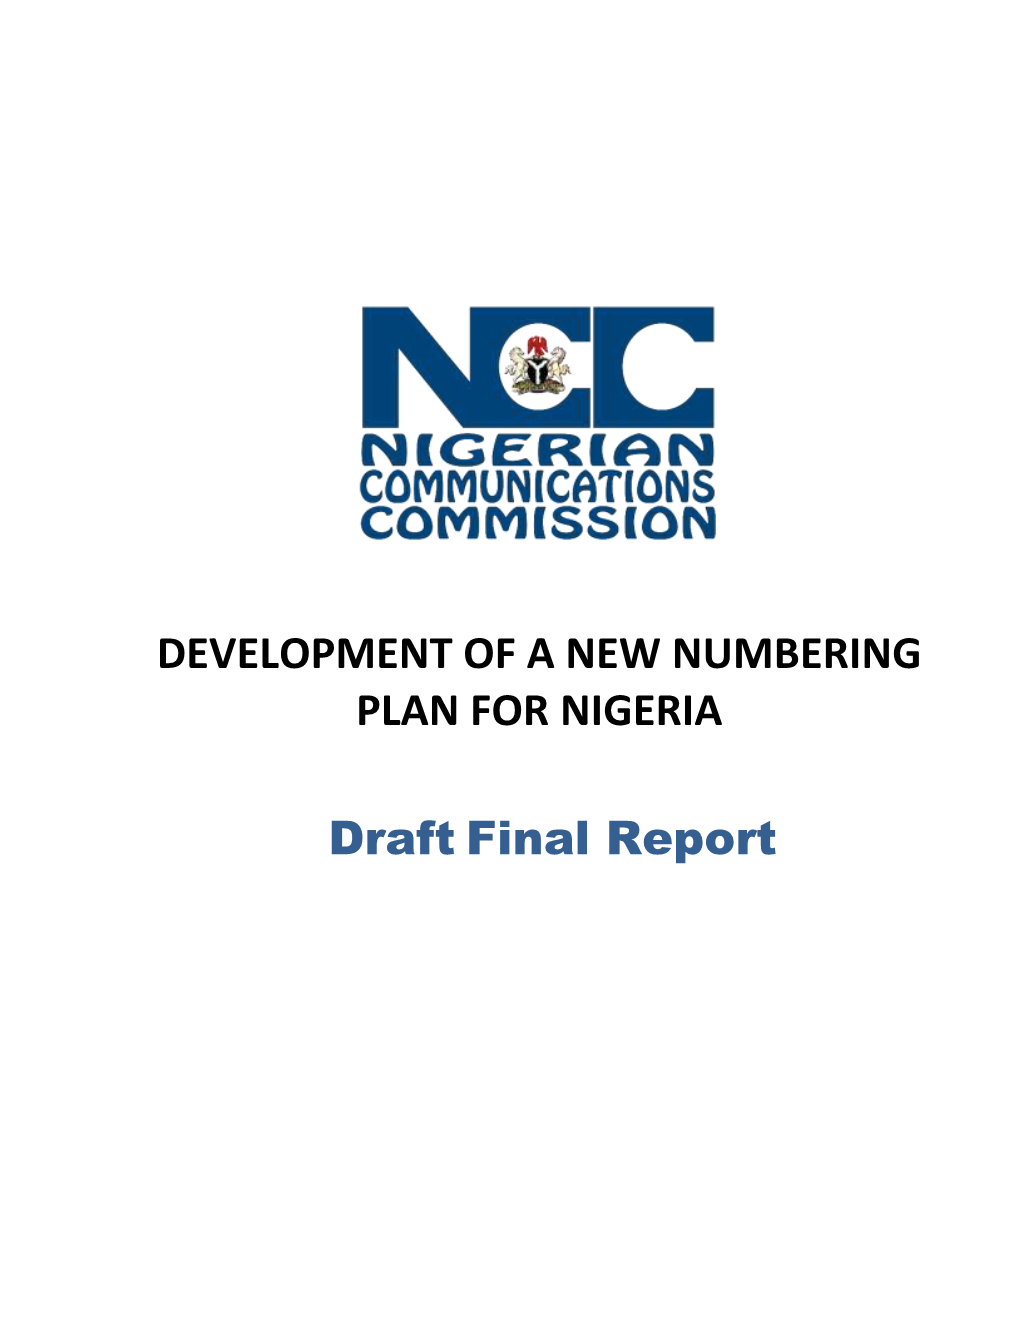 Development of a New Numbering Plan for Nigeria